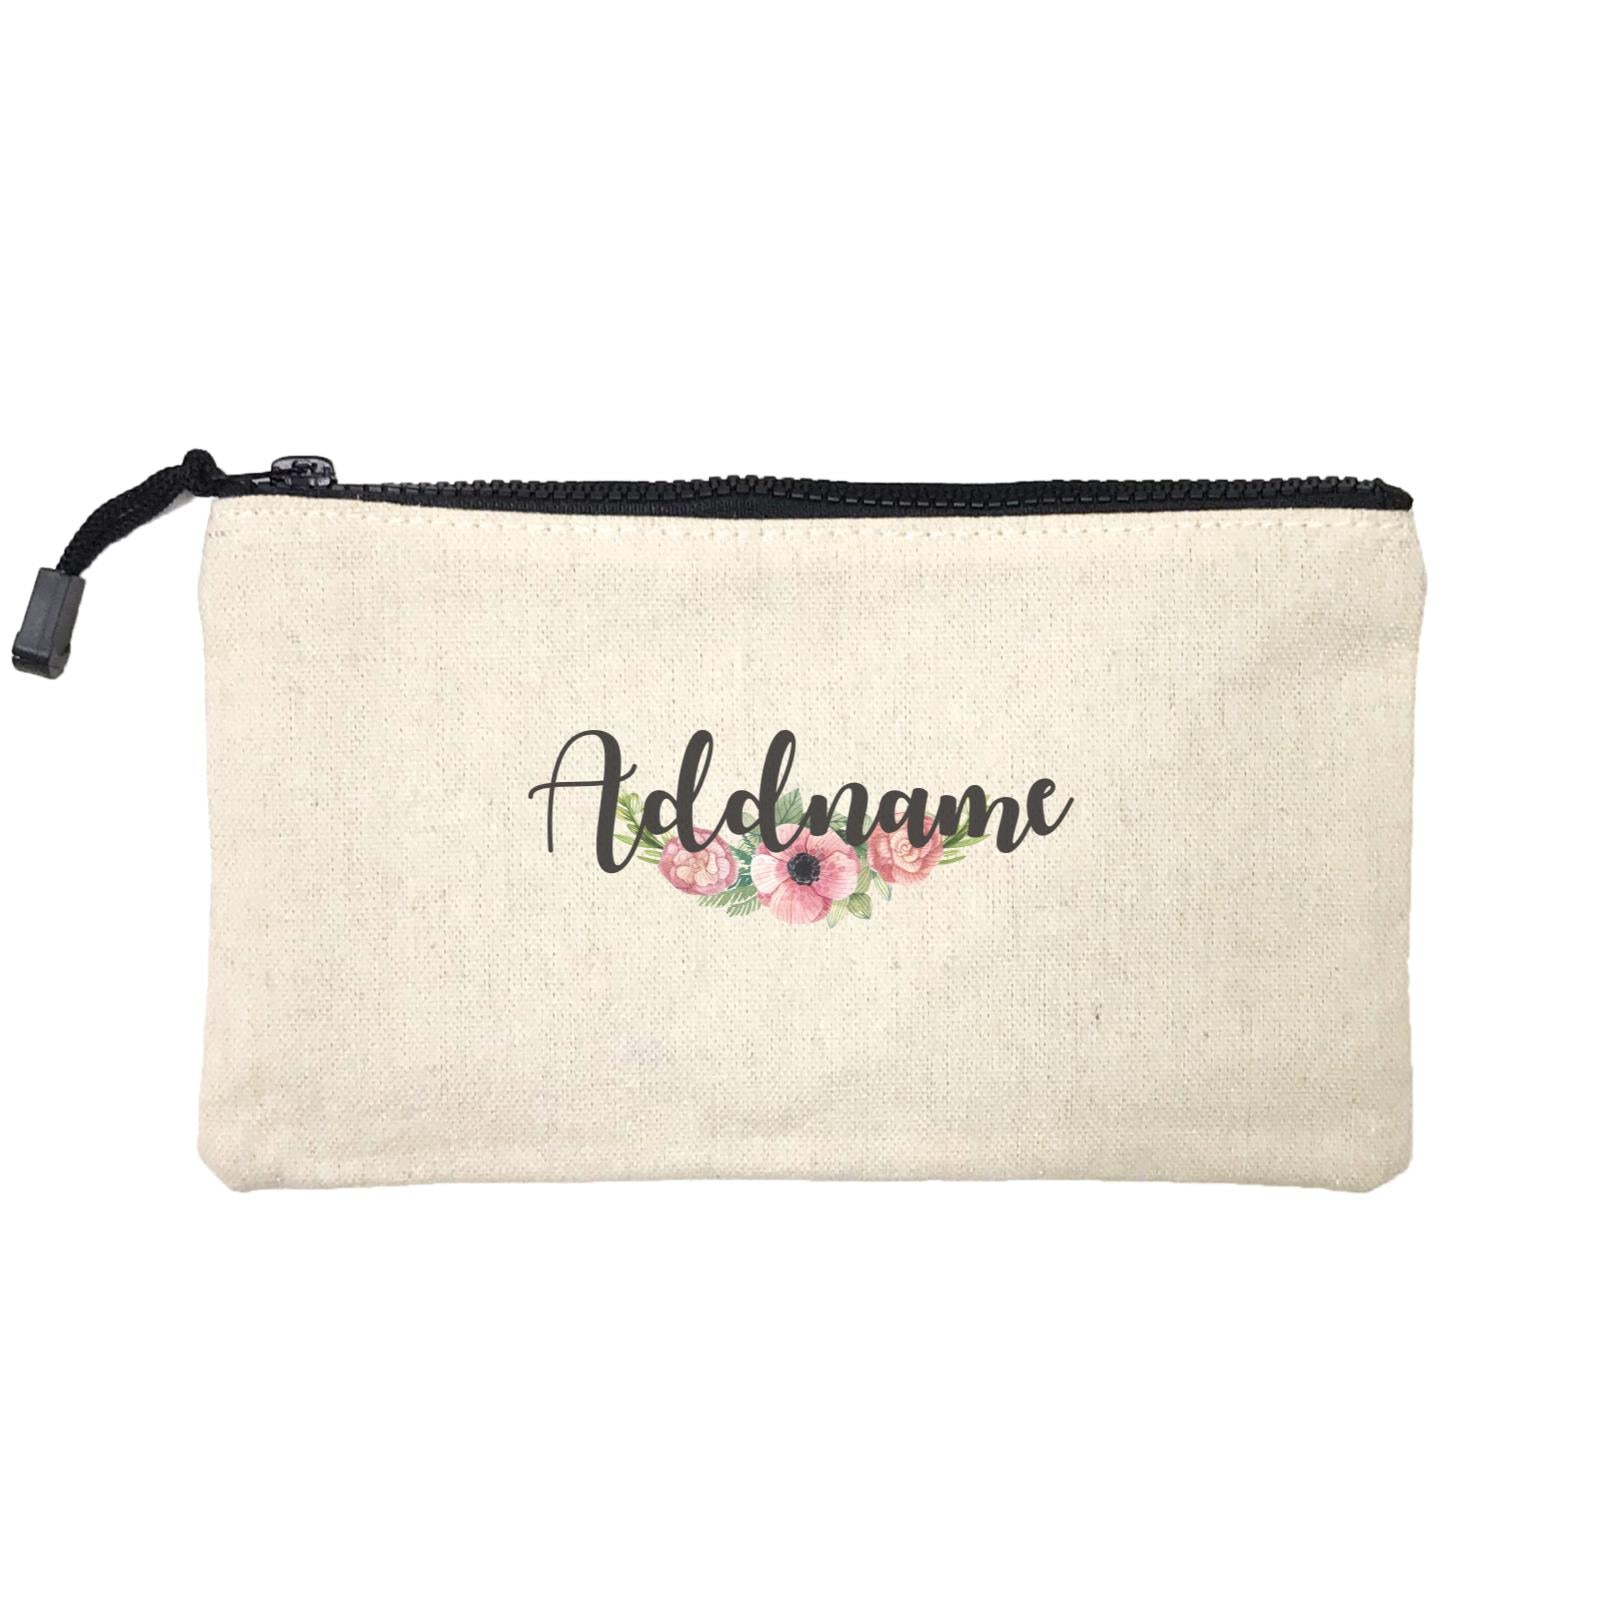 Bridesmaid Floral Sweet Pink Flower Addname Mini Accessories Stationery Pouch